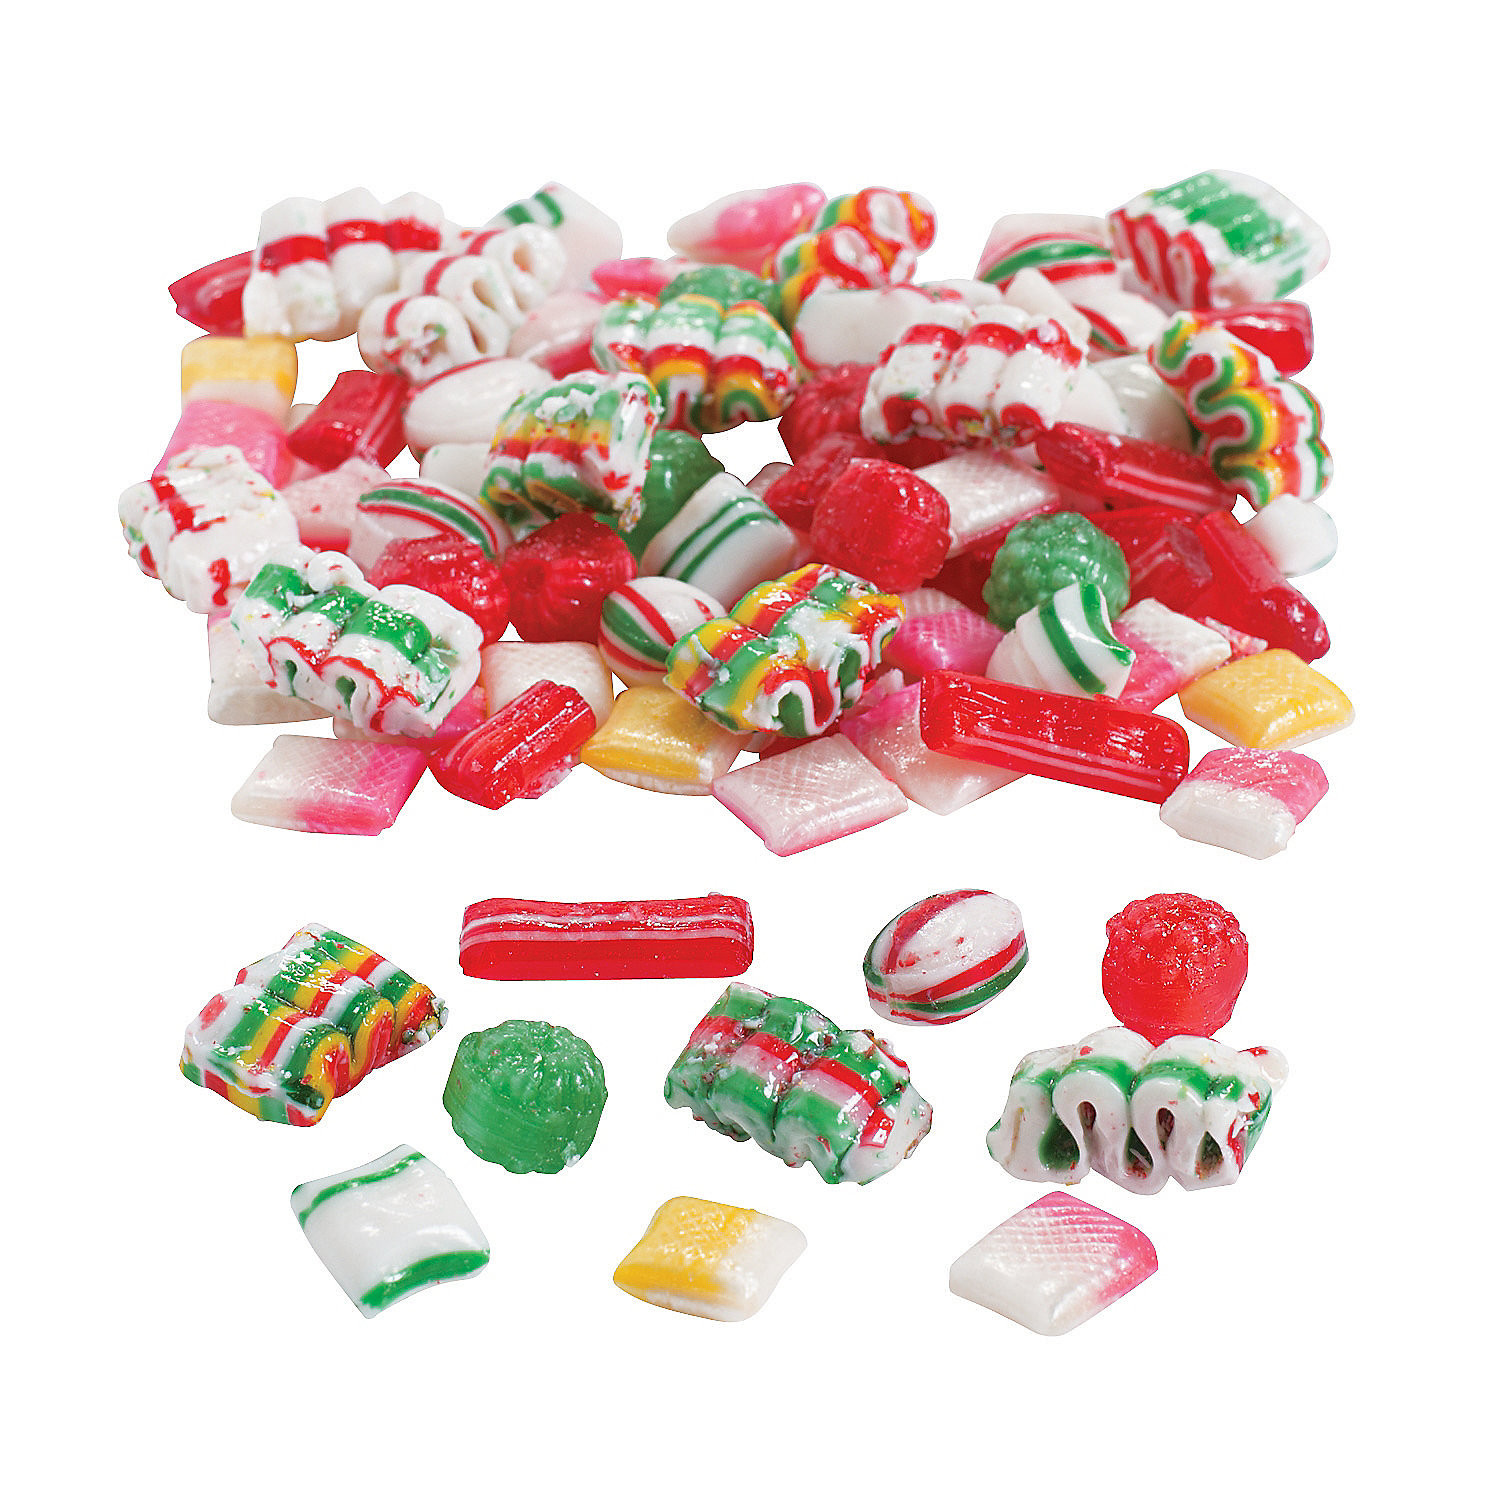 Old Fashioned Christmas Candy Mix
 Brach’s Holiday Old Fashioned Candy Mix Oriental